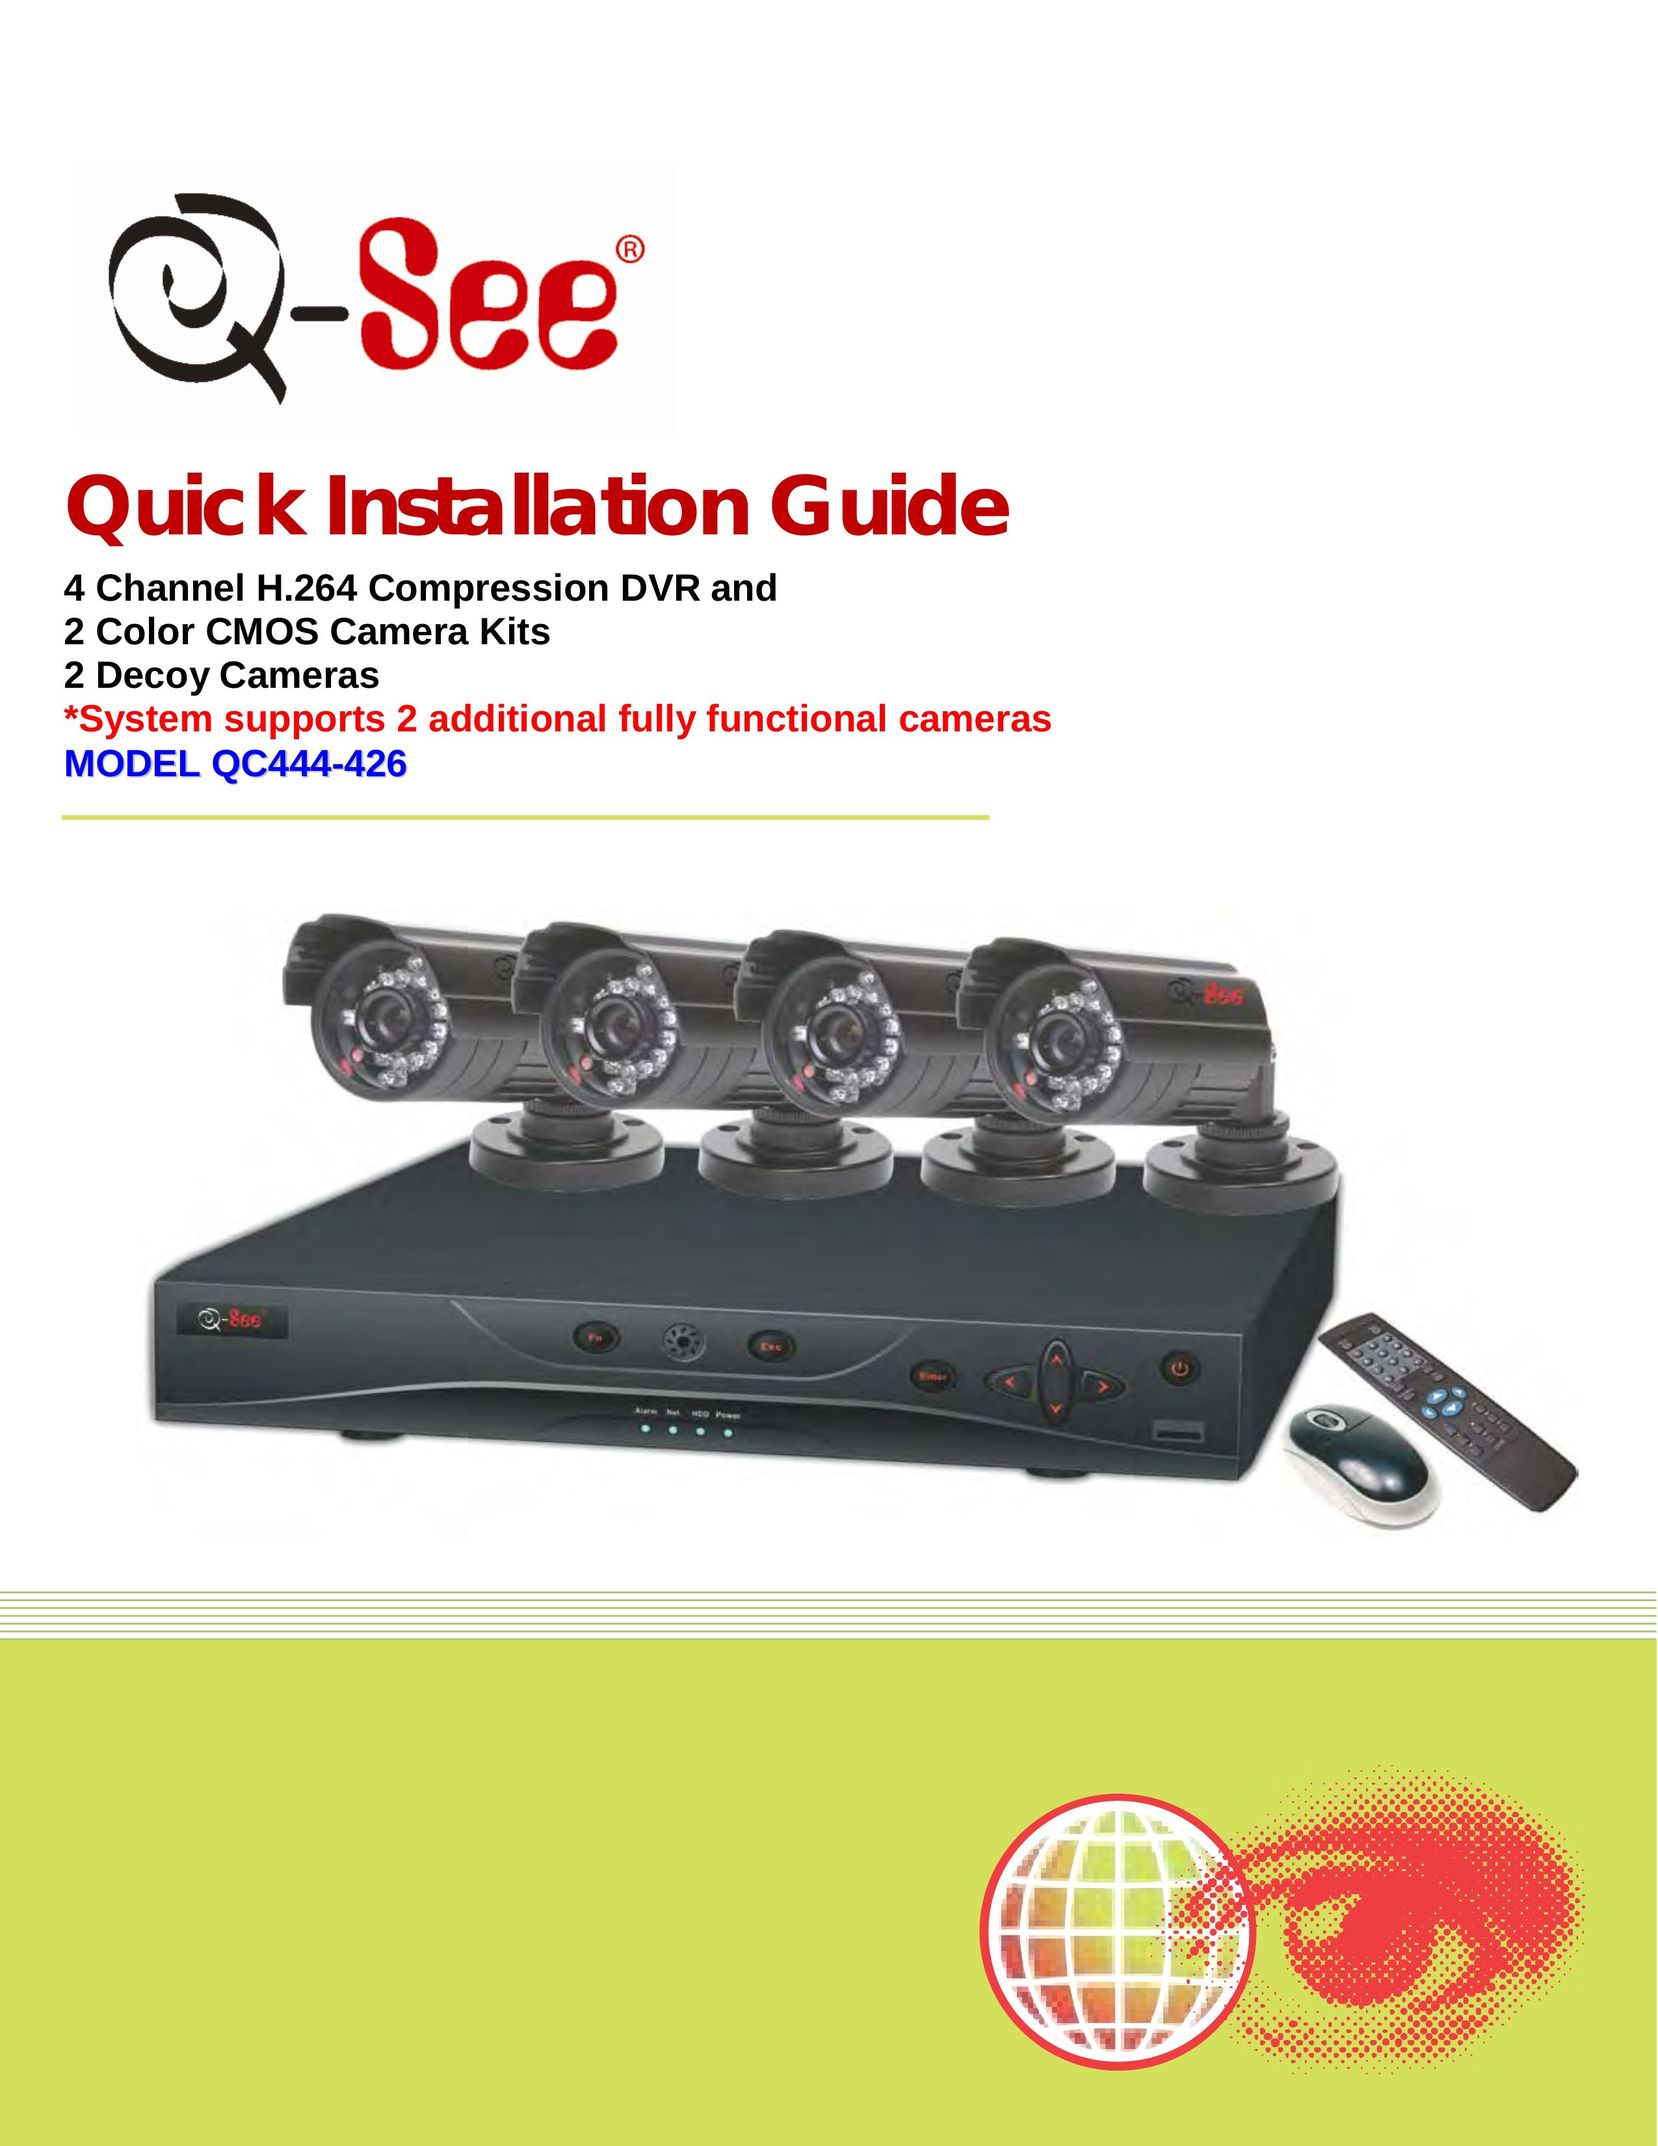 Q-See QC444-426 Home Security System User Manual